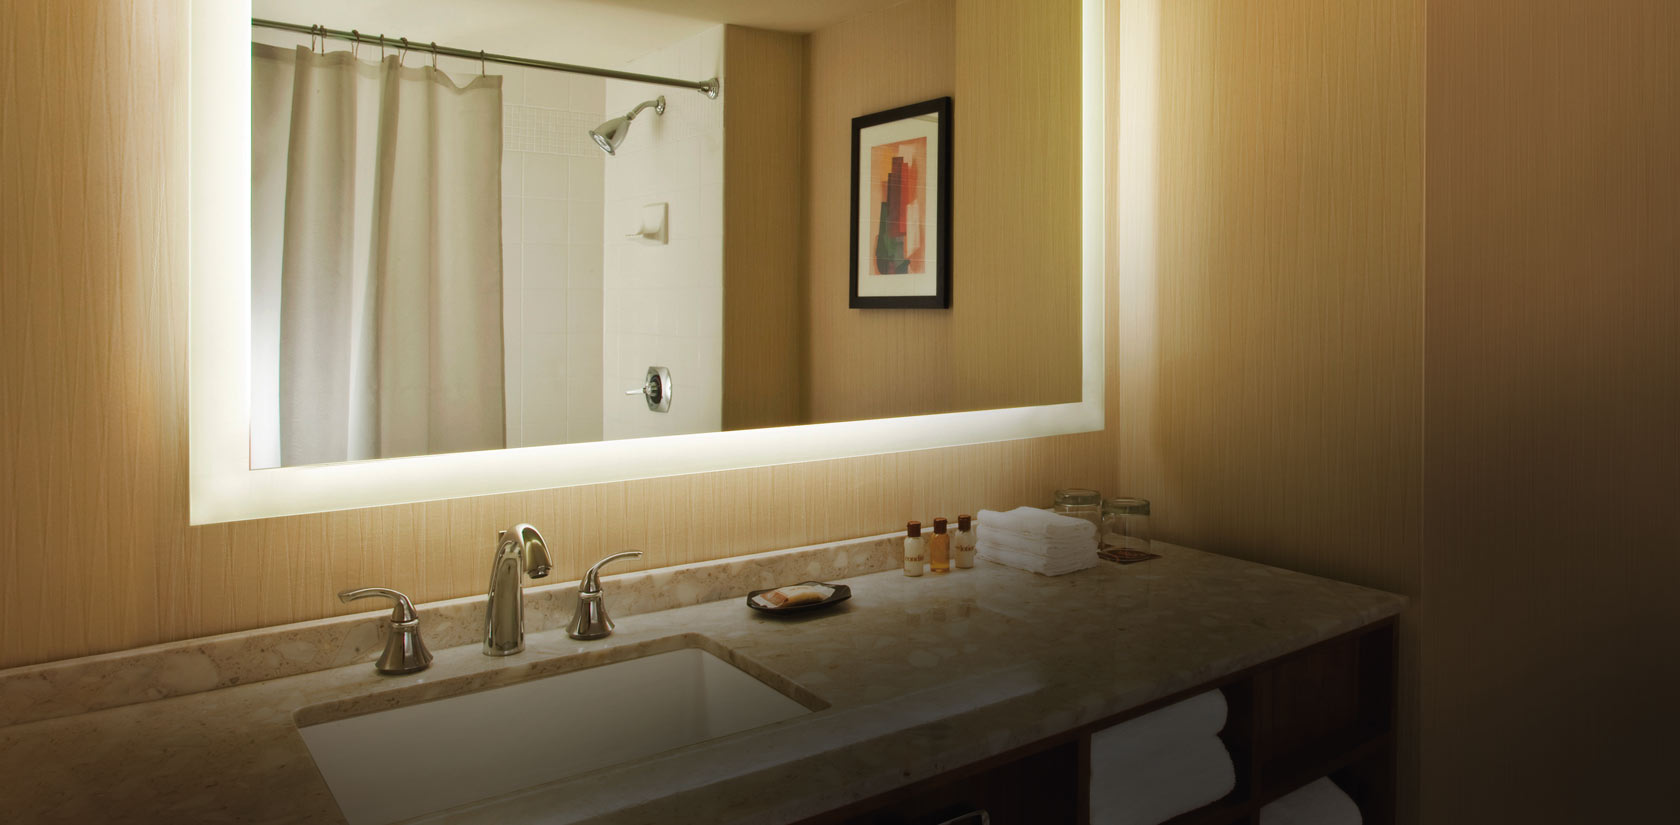 Why Should You Install Illuminated Mirrors In Your Bathroom?